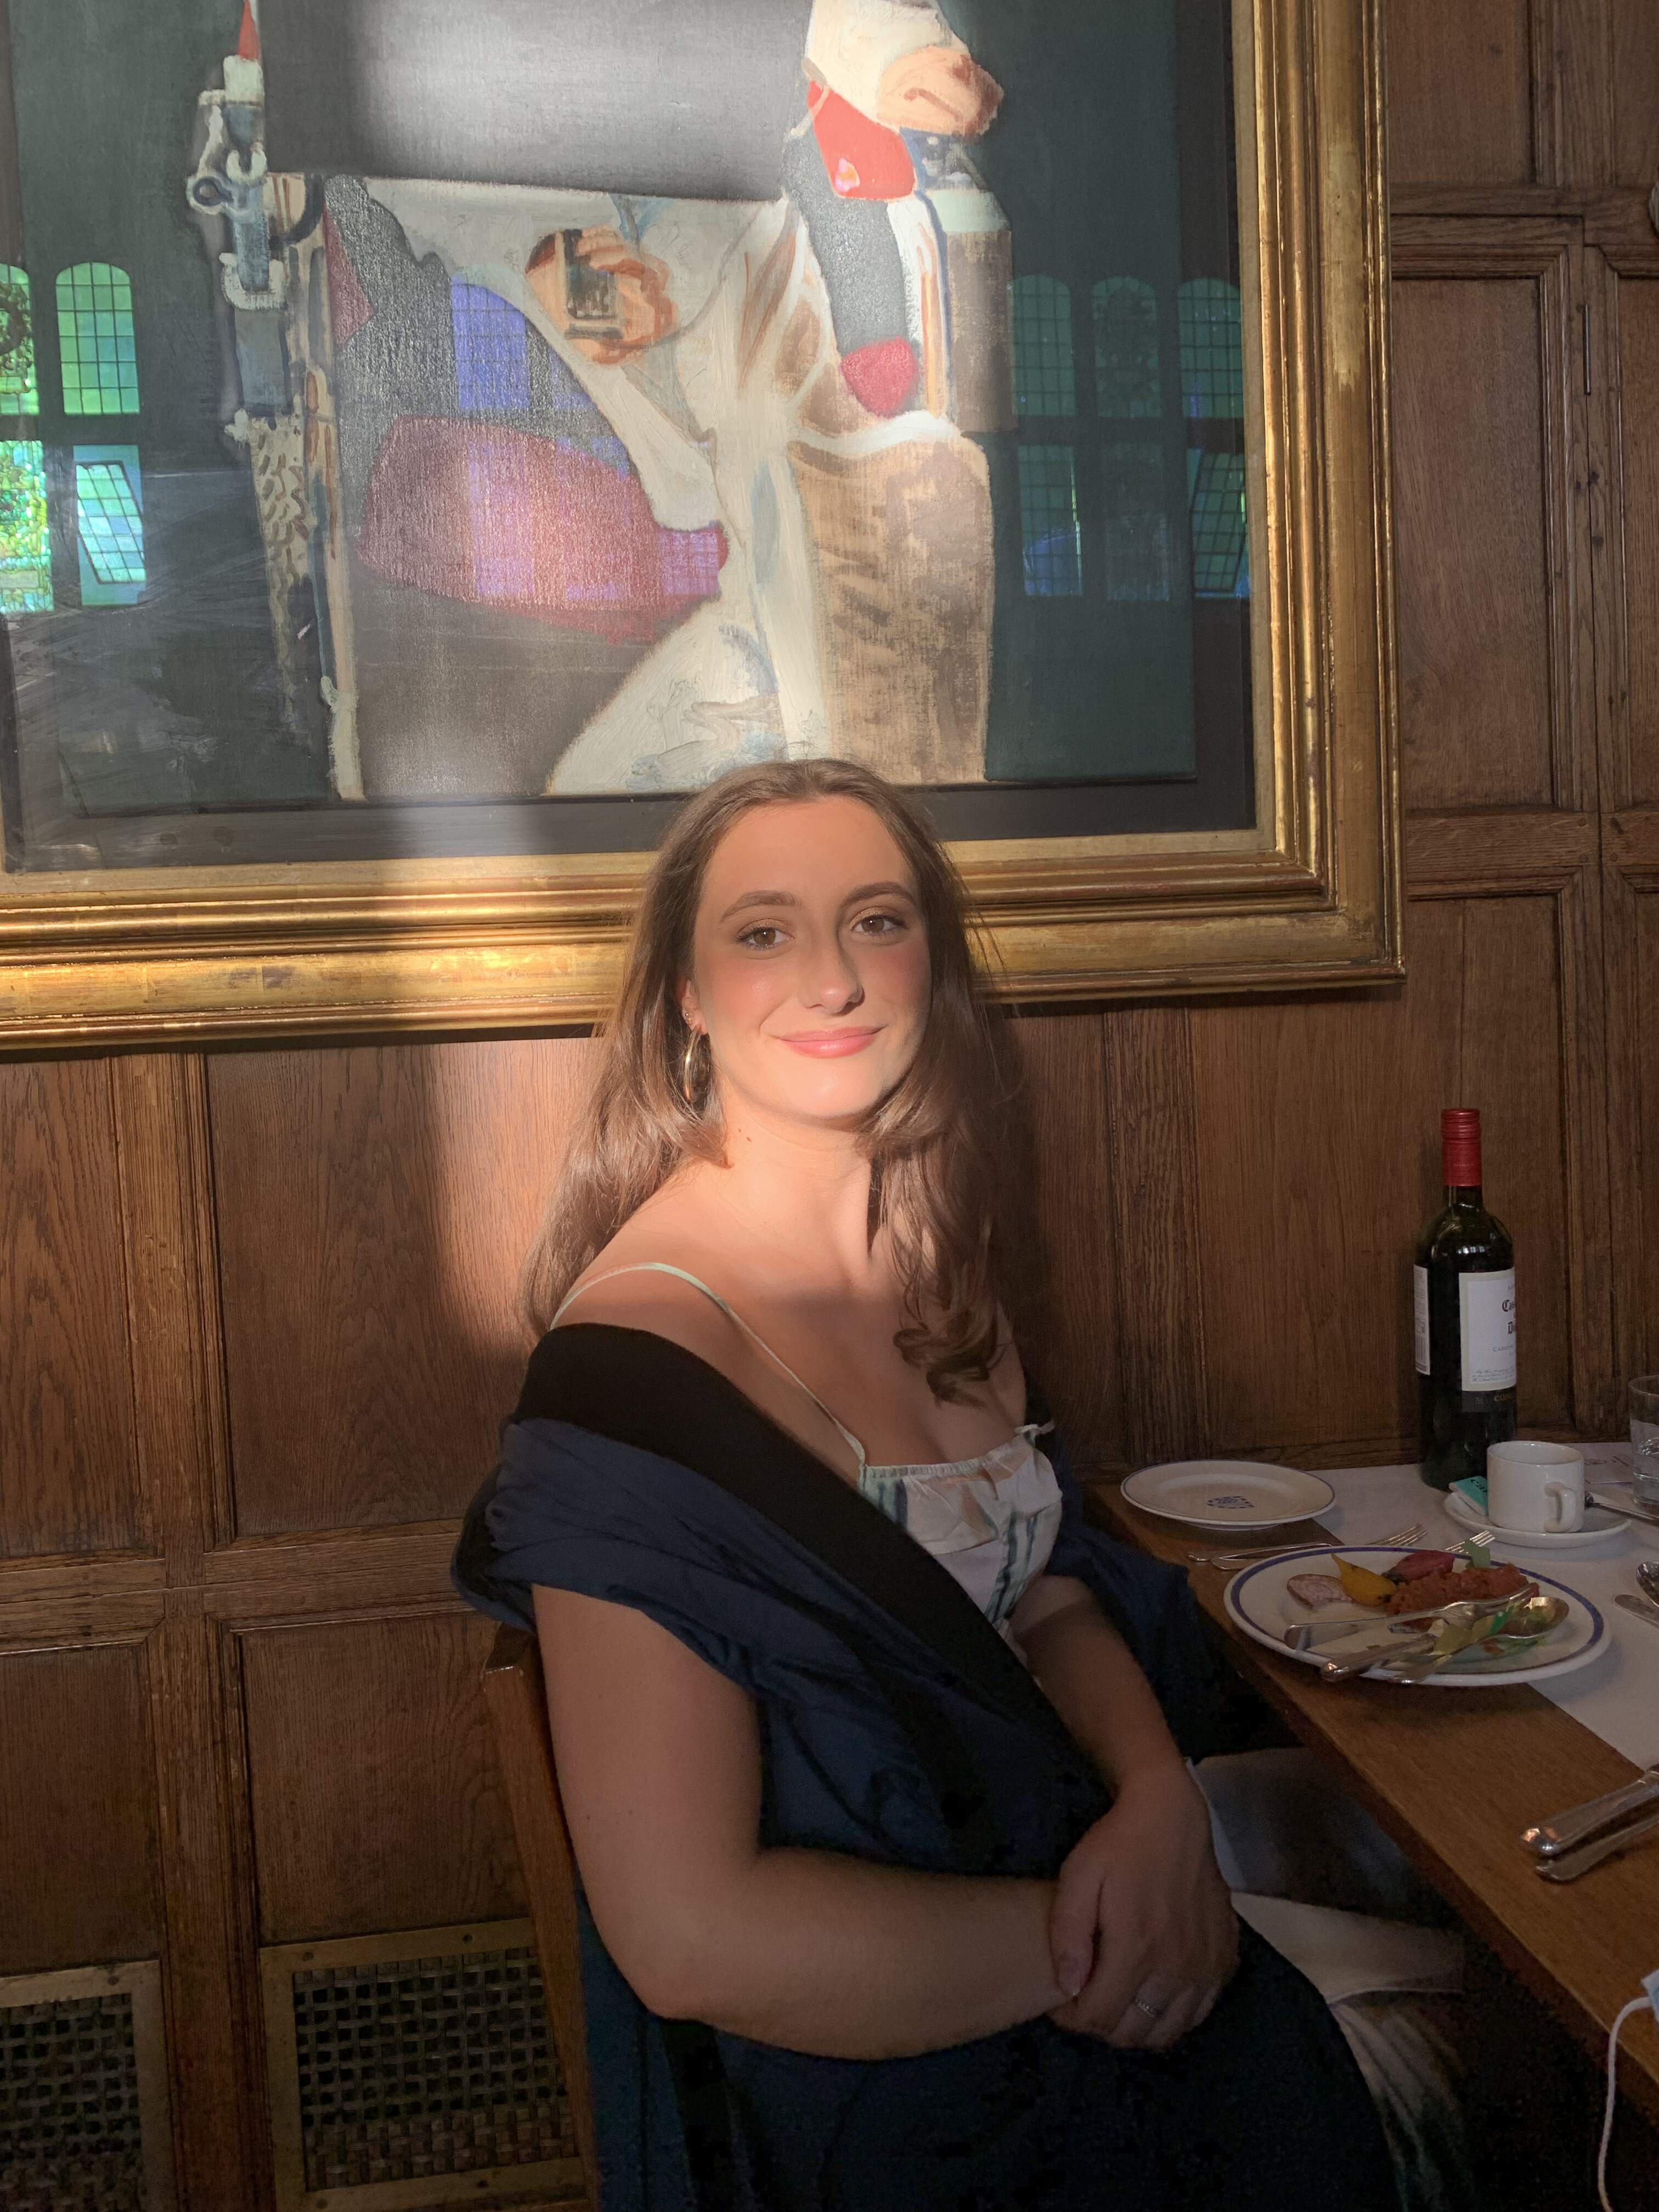 Picture of Grace at a formal dinner, smiling in a gown